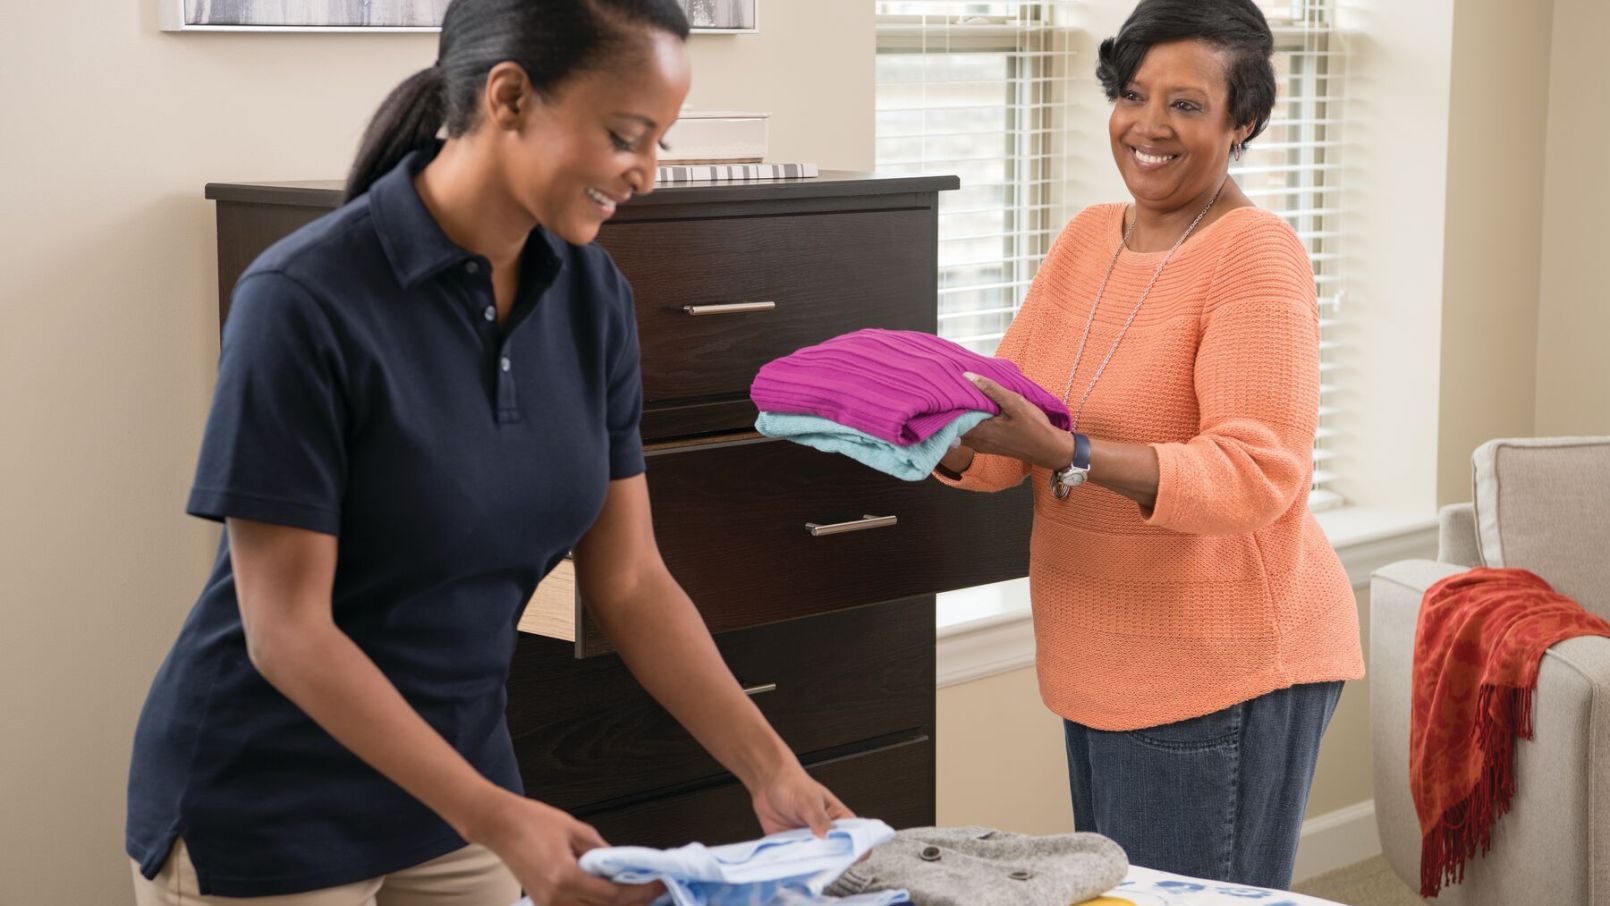 An Erickson Senior Living caregiver assisting a resident with folding and putting away laundry.